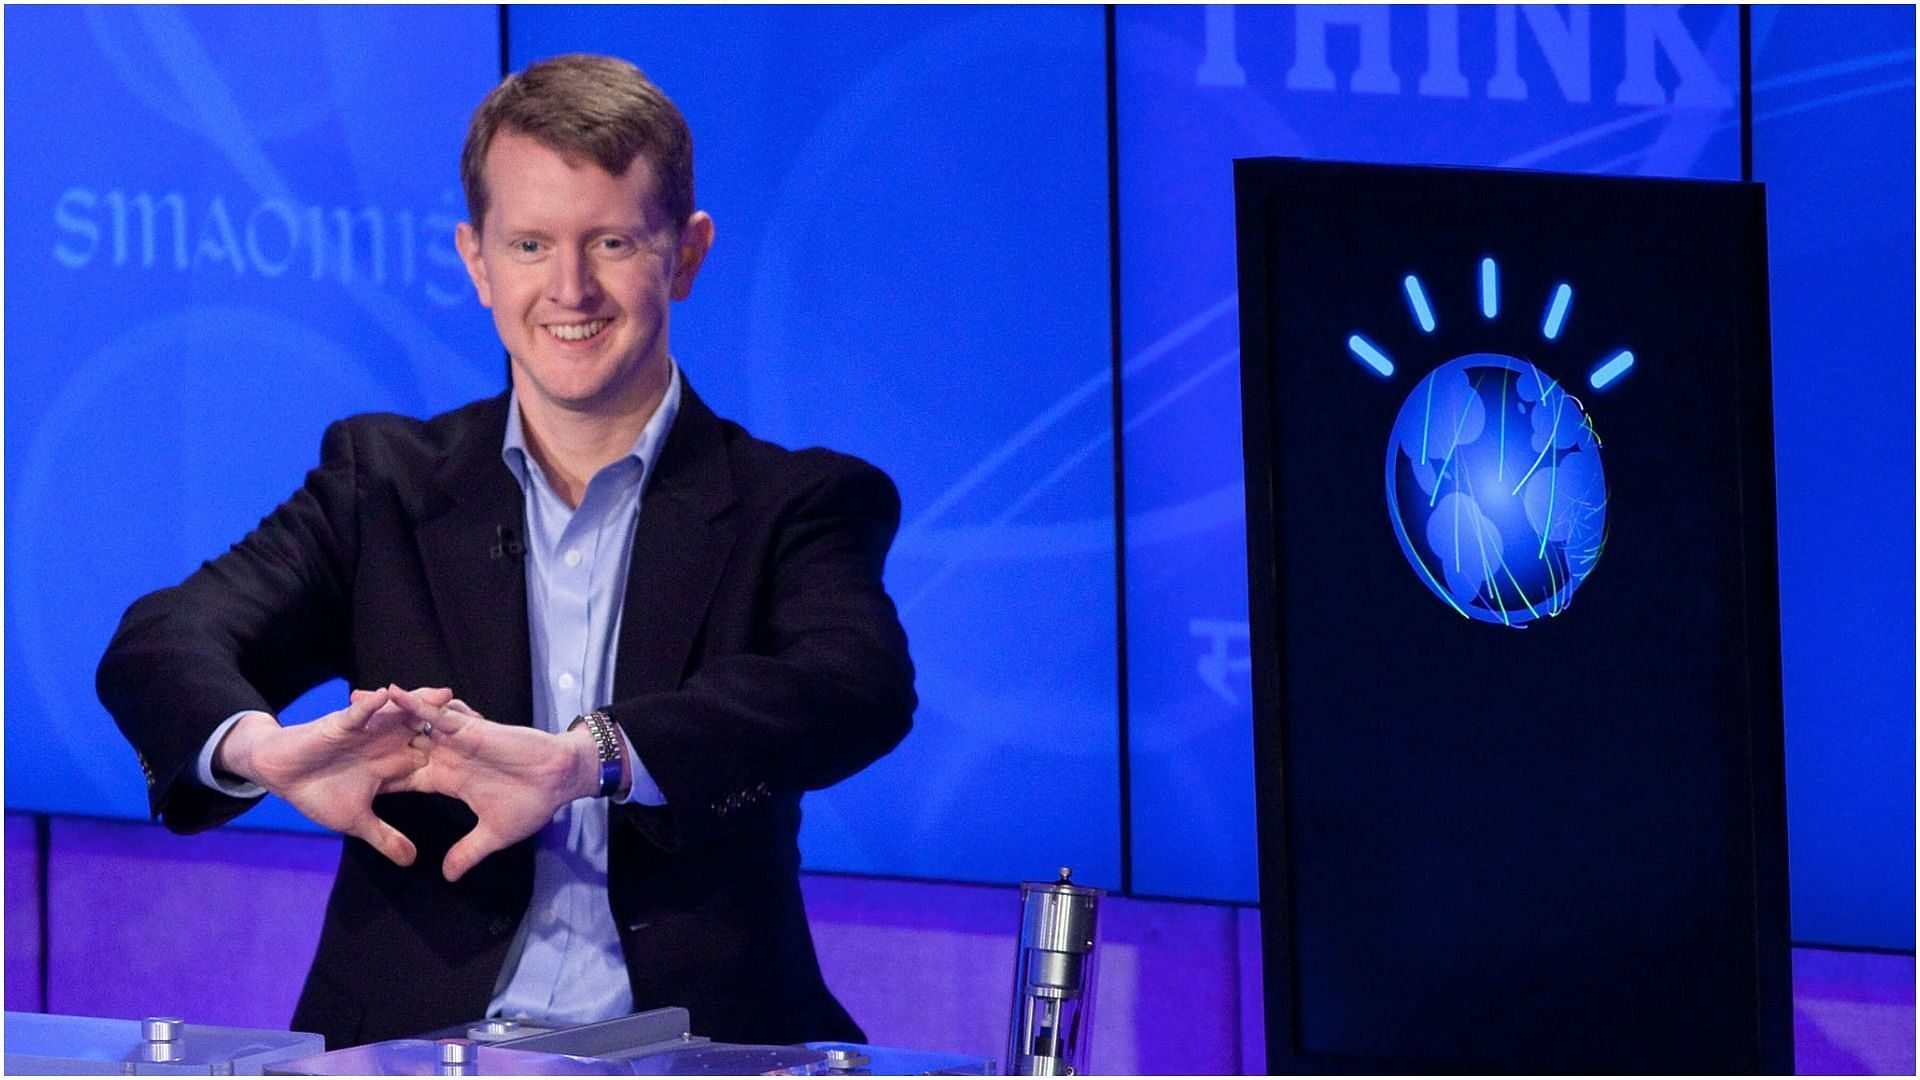 Ken Jennings competes against &#039;Watson&#039; at a press conference to discuss the upcoming Man V. Machine &quot;Jeopardy!&quot; competition at the IBM T.J. Watson Research Center on January 13, 2011 in Yorktown Heights, New York (Image via Getty Images)